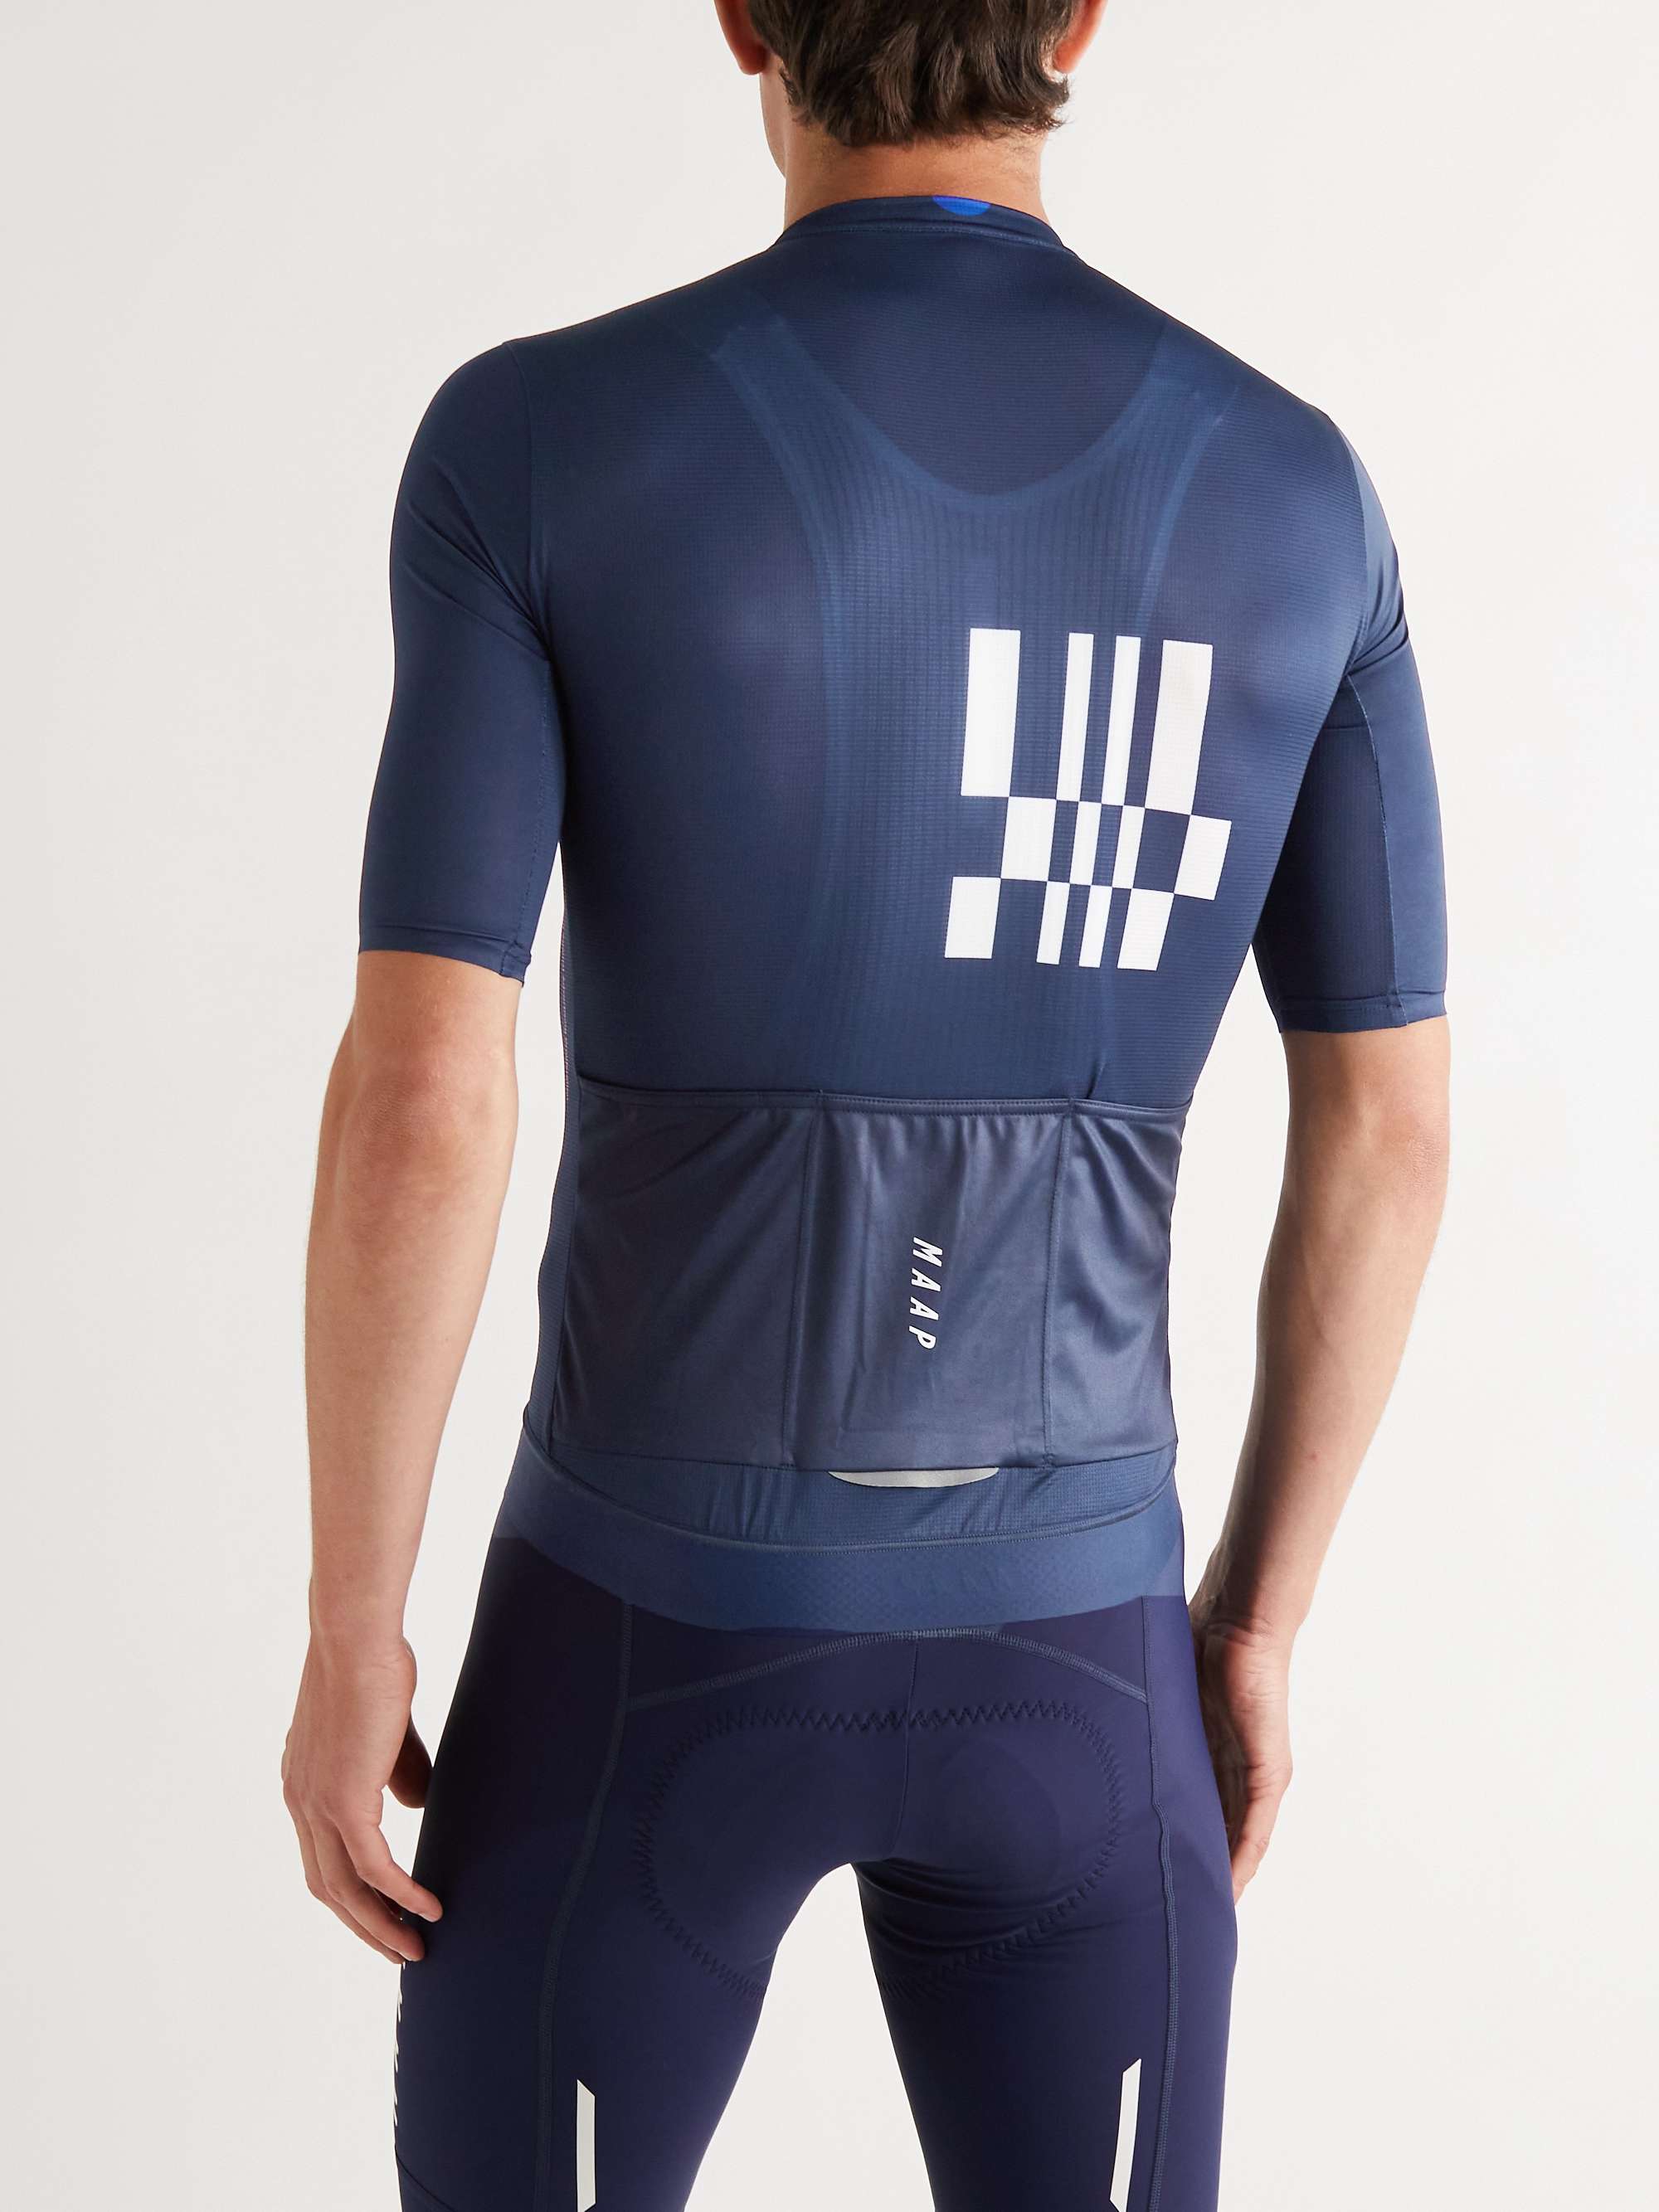 MAAP Vapor Pro Printed Recycled Mesh Cycling Jersey